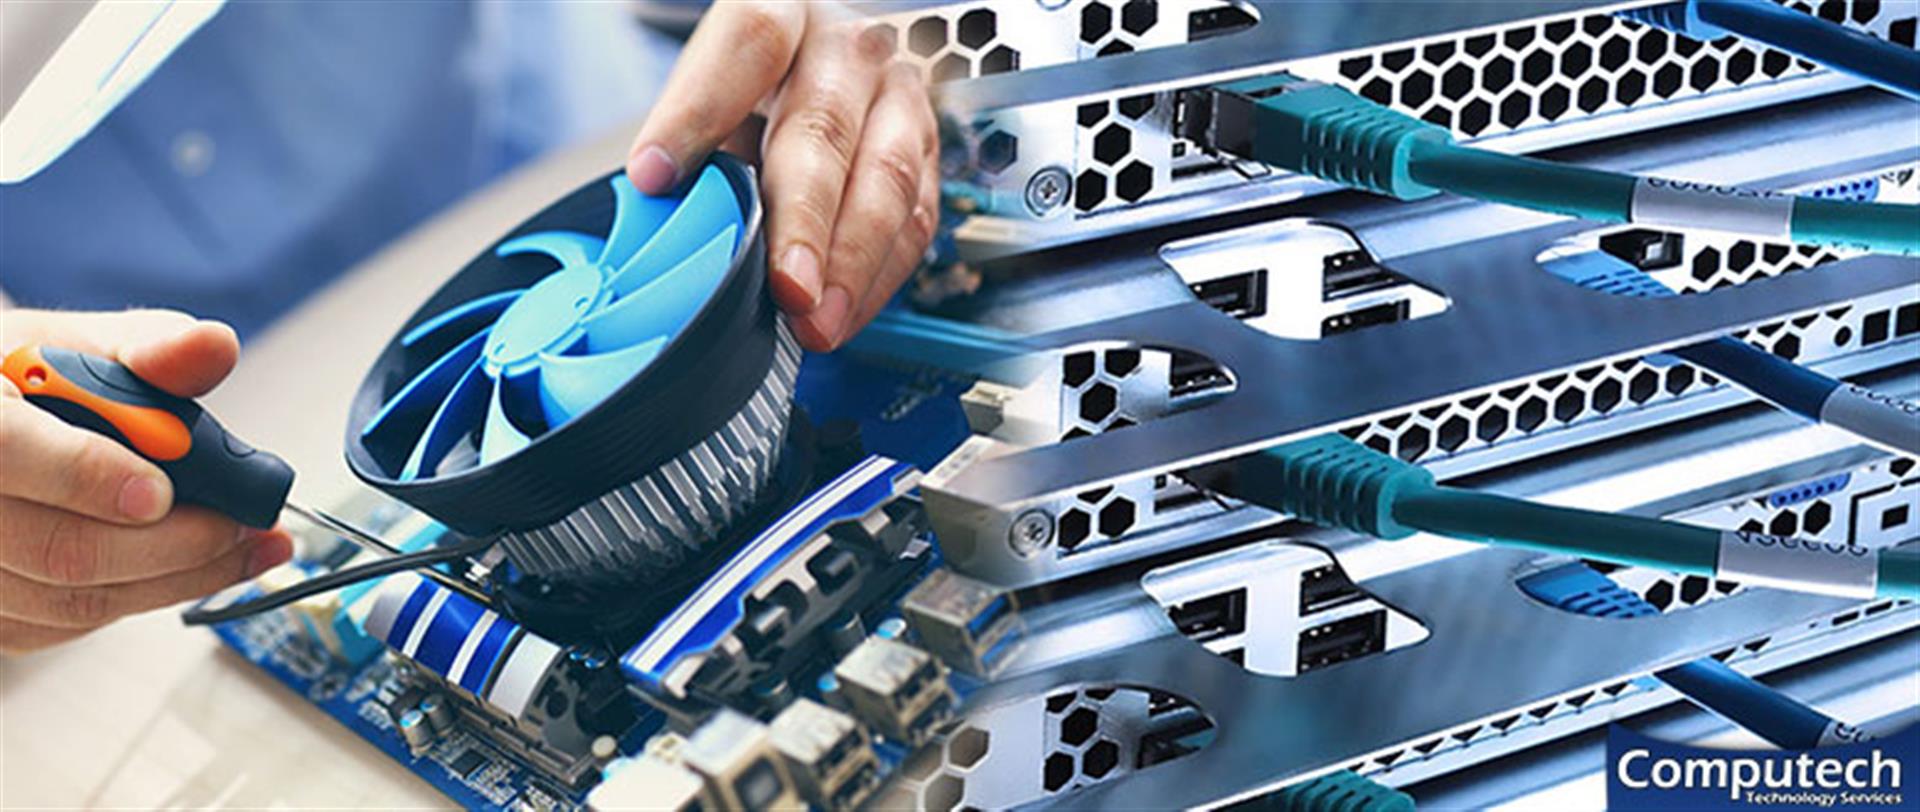 Dacula Georgia On-Site PC & Printer Repair, Networking, Voice & Data Cabling Services